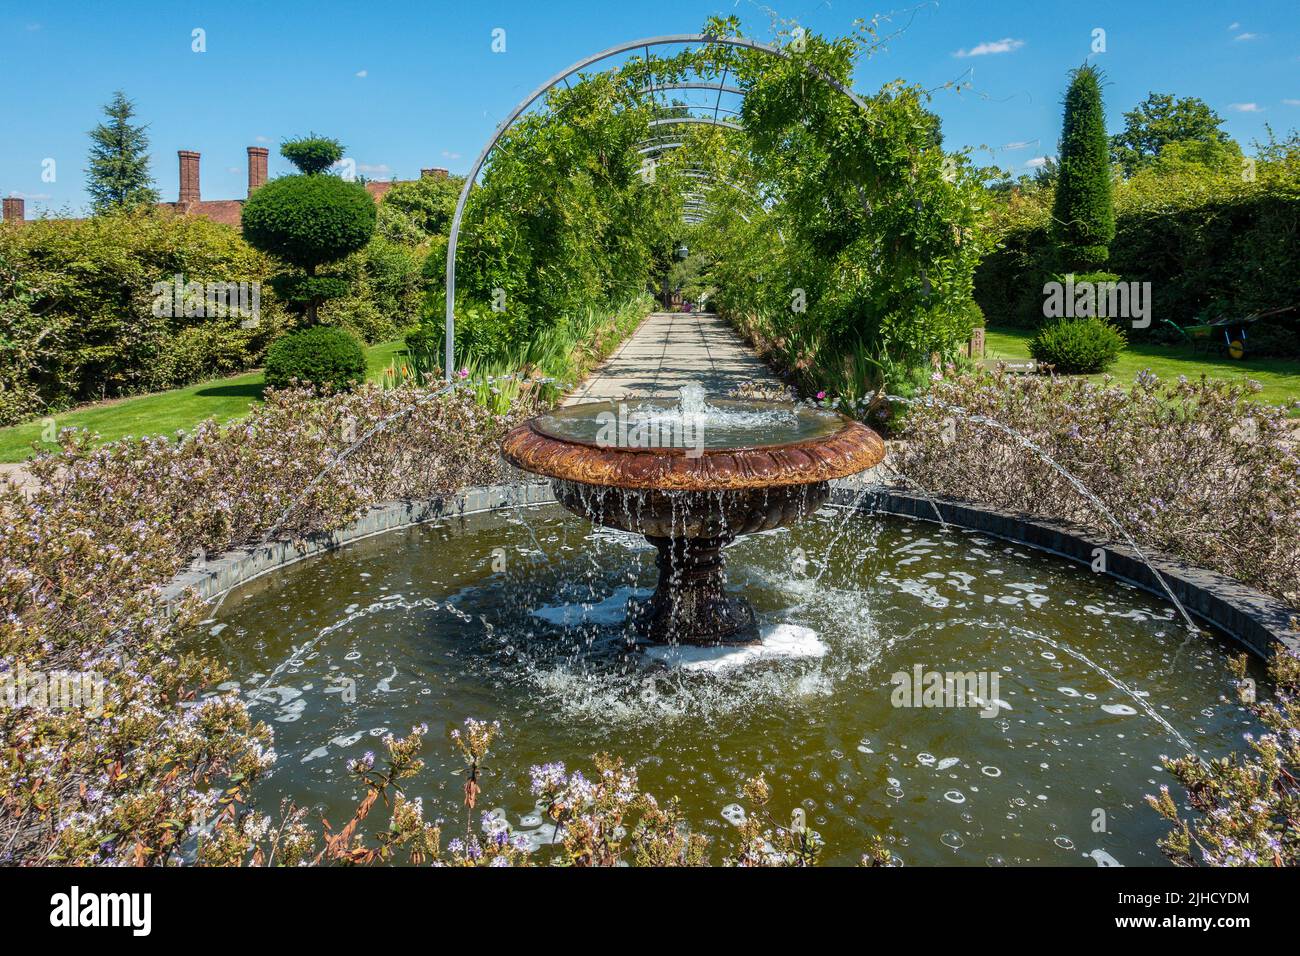 The Fountain in the Cottage Garden RHS Wisley Gardens Wisley Inghilterra UK Foto Stock